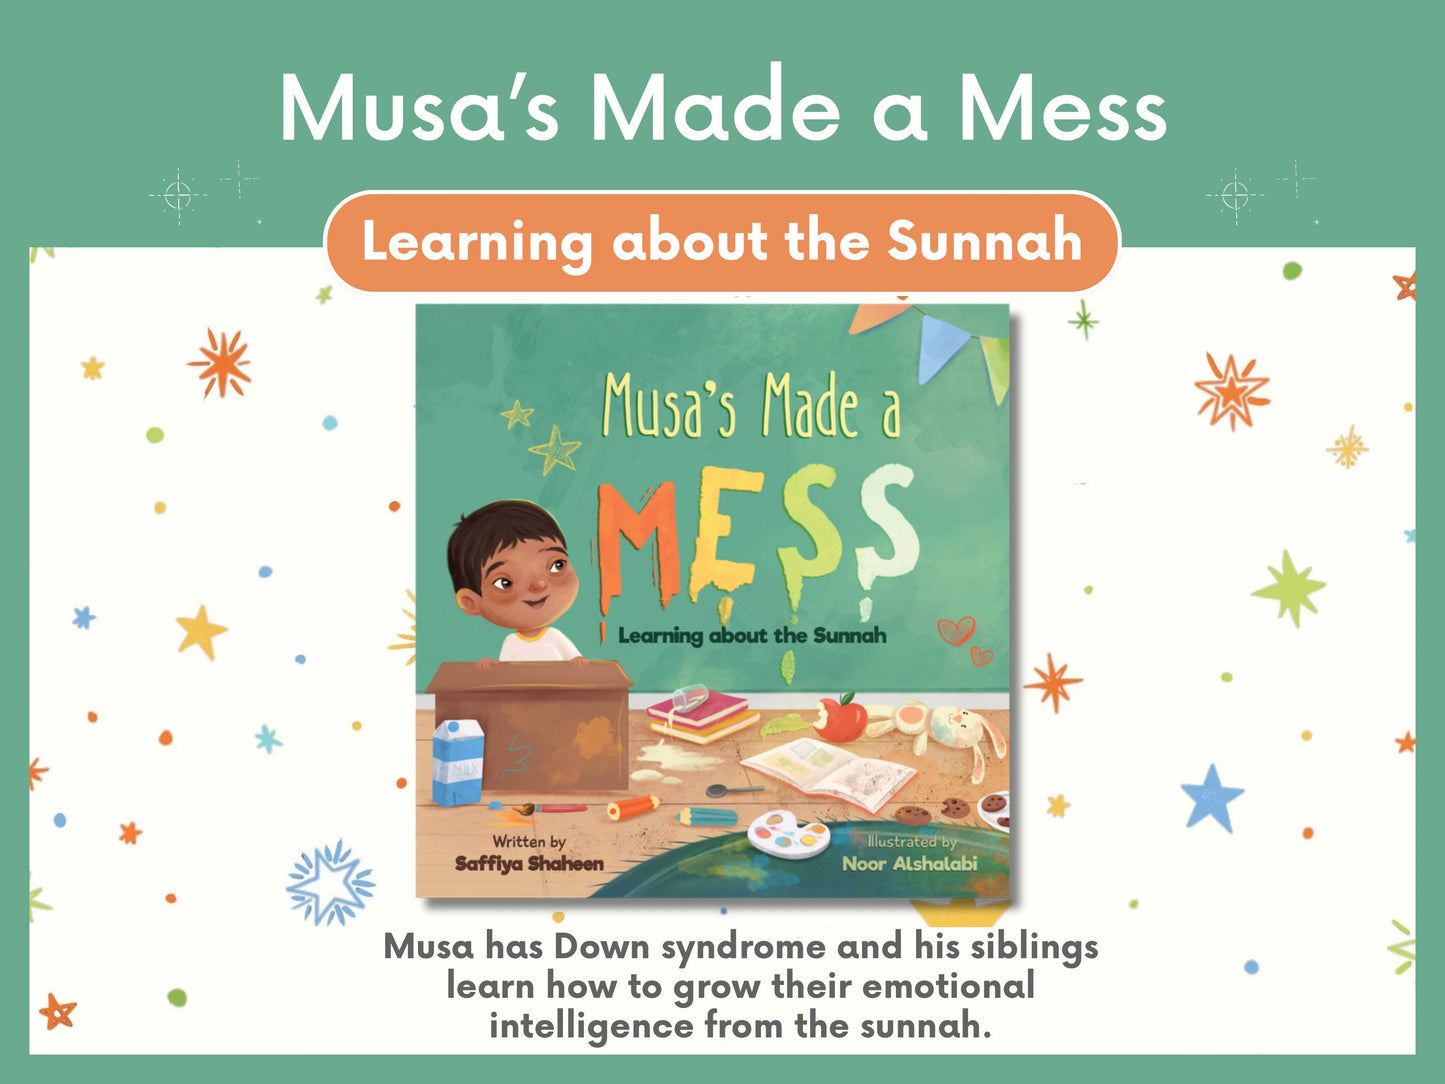 Musa’s Made a Mess - Learning about the Sunnah